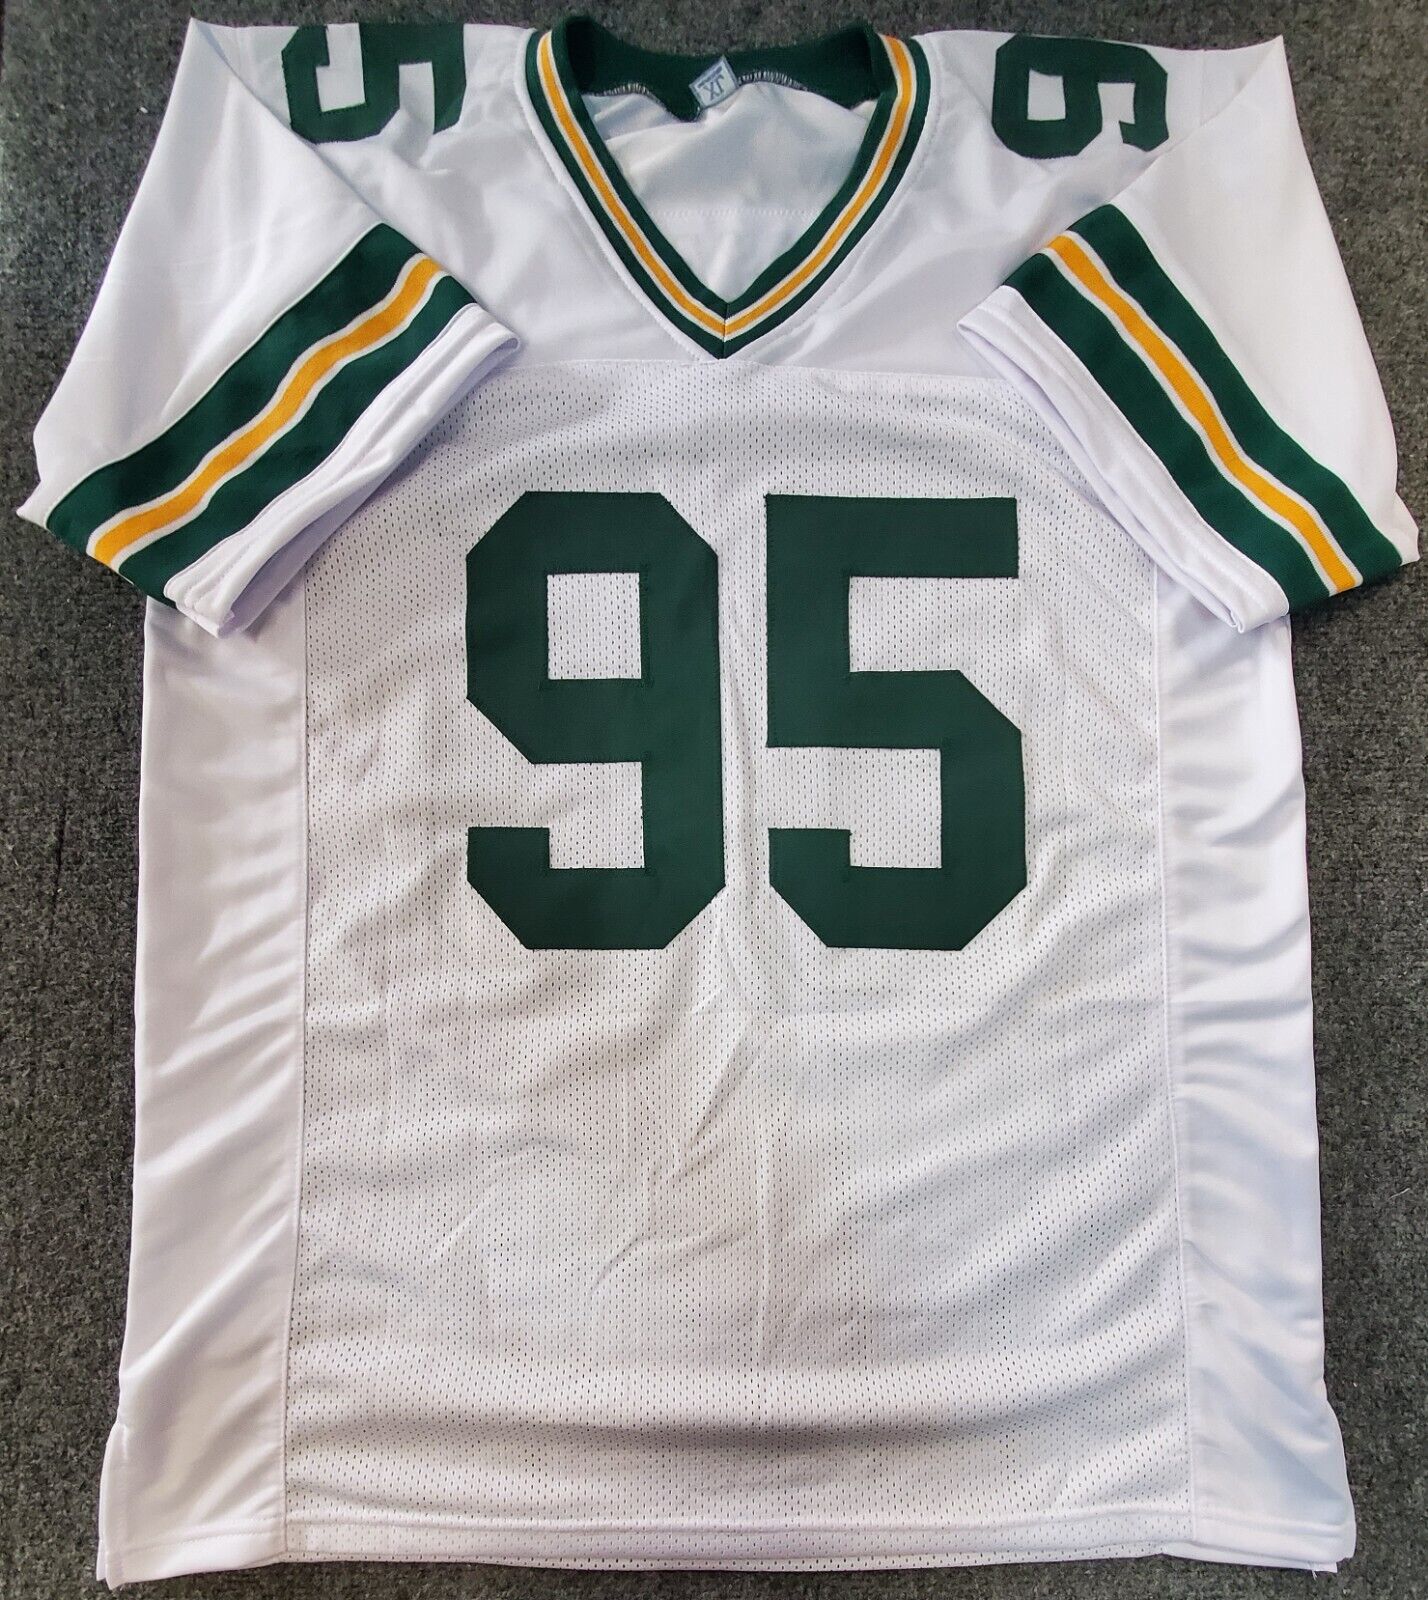 packers jersey